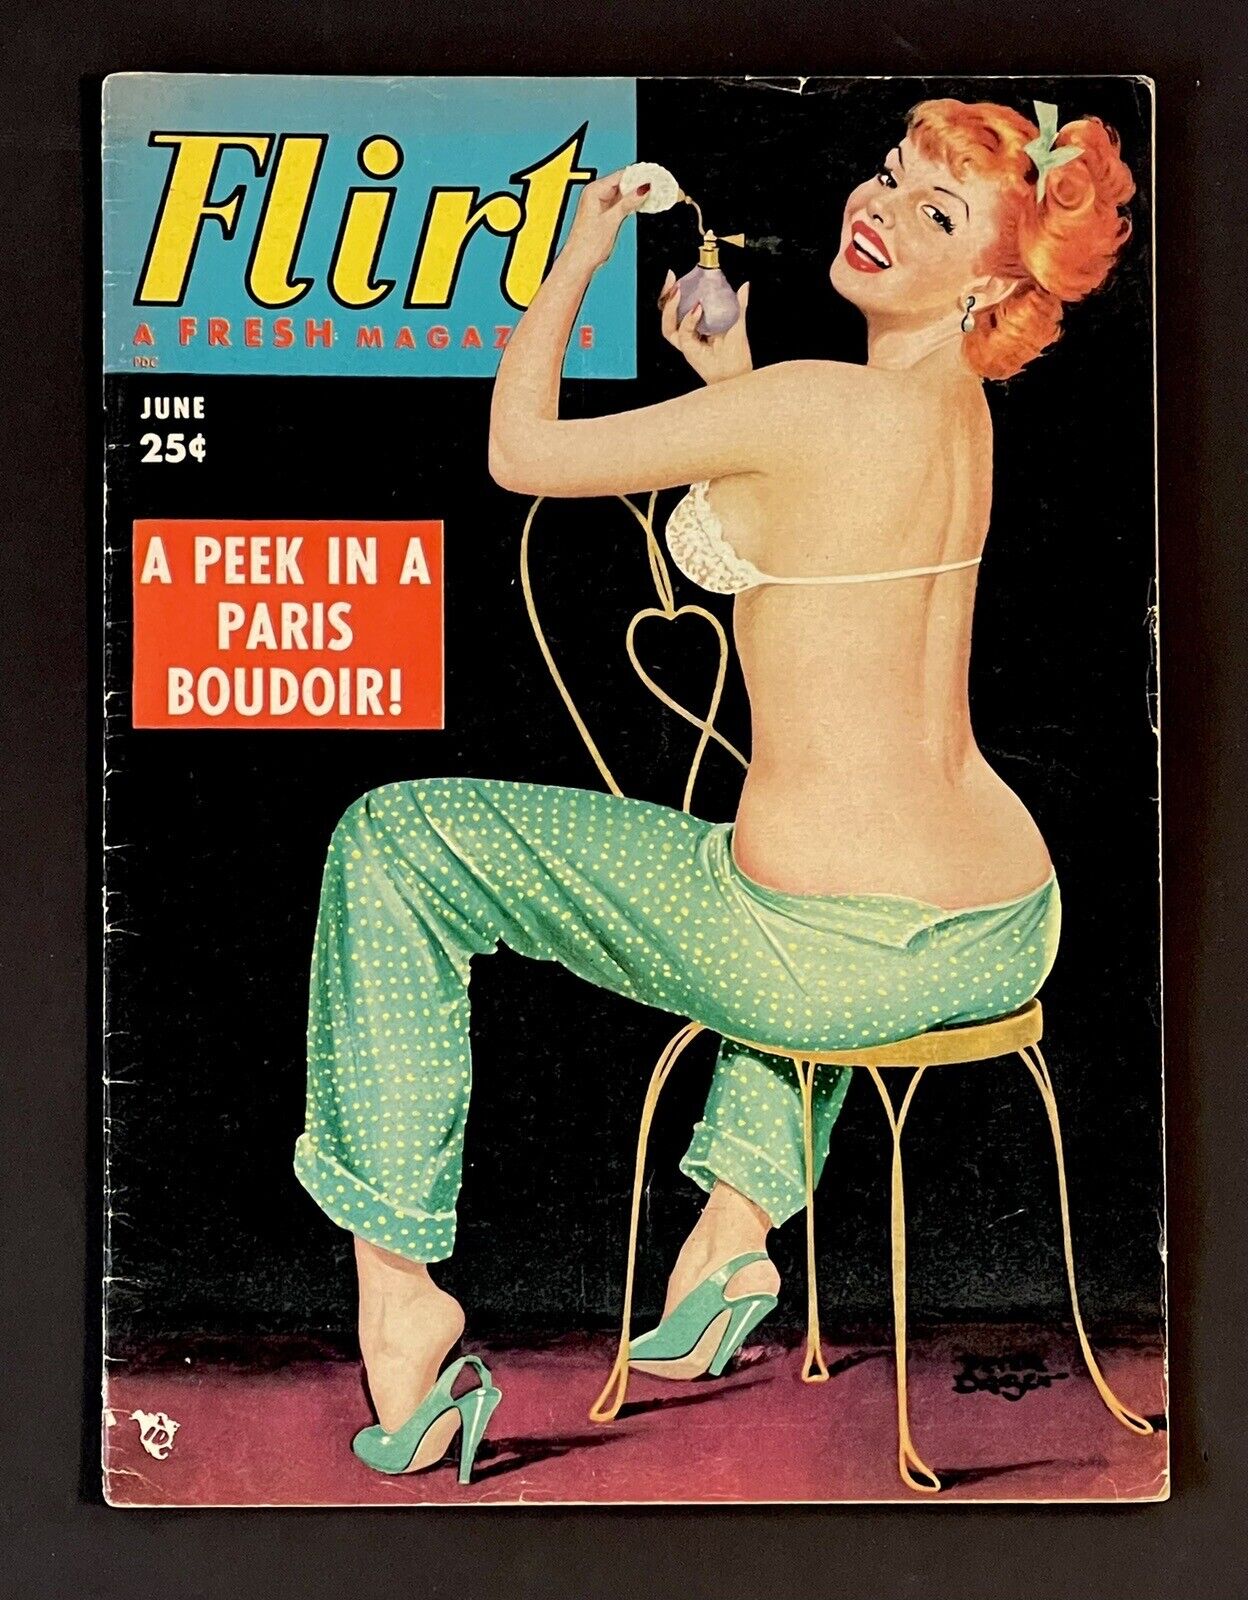 1952 JUNE ISSUE OF FLIRT MAGAZINE WITH COOL PETER DRIBEN  COVER ART